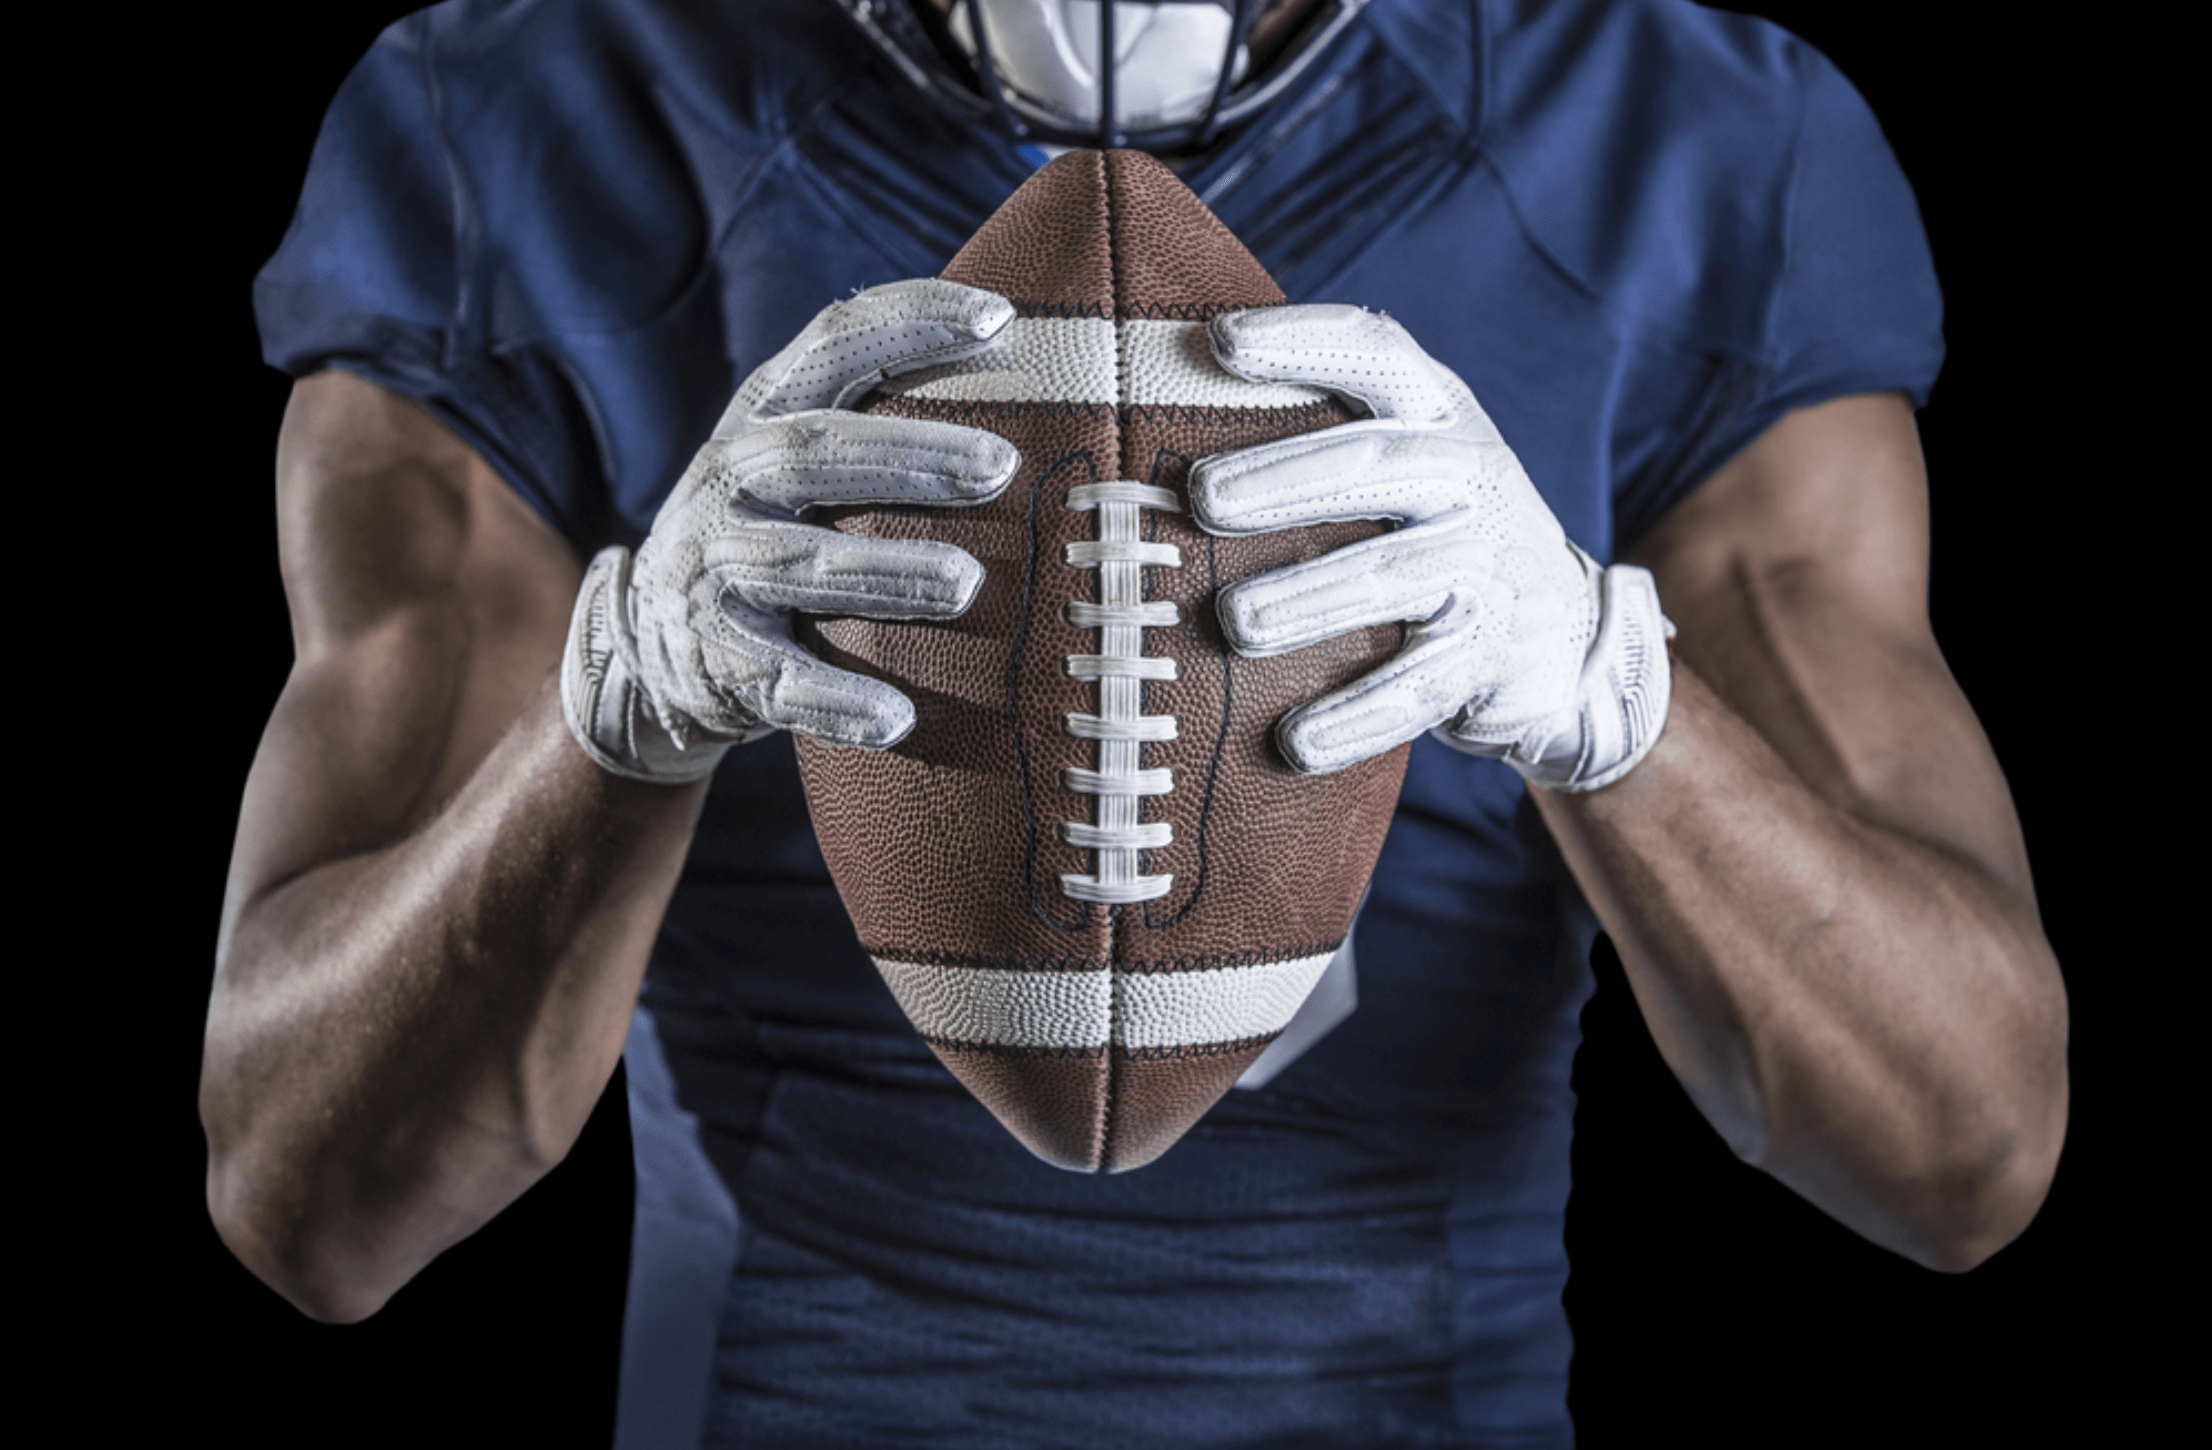 The benefits of the football gloves for wide receivers